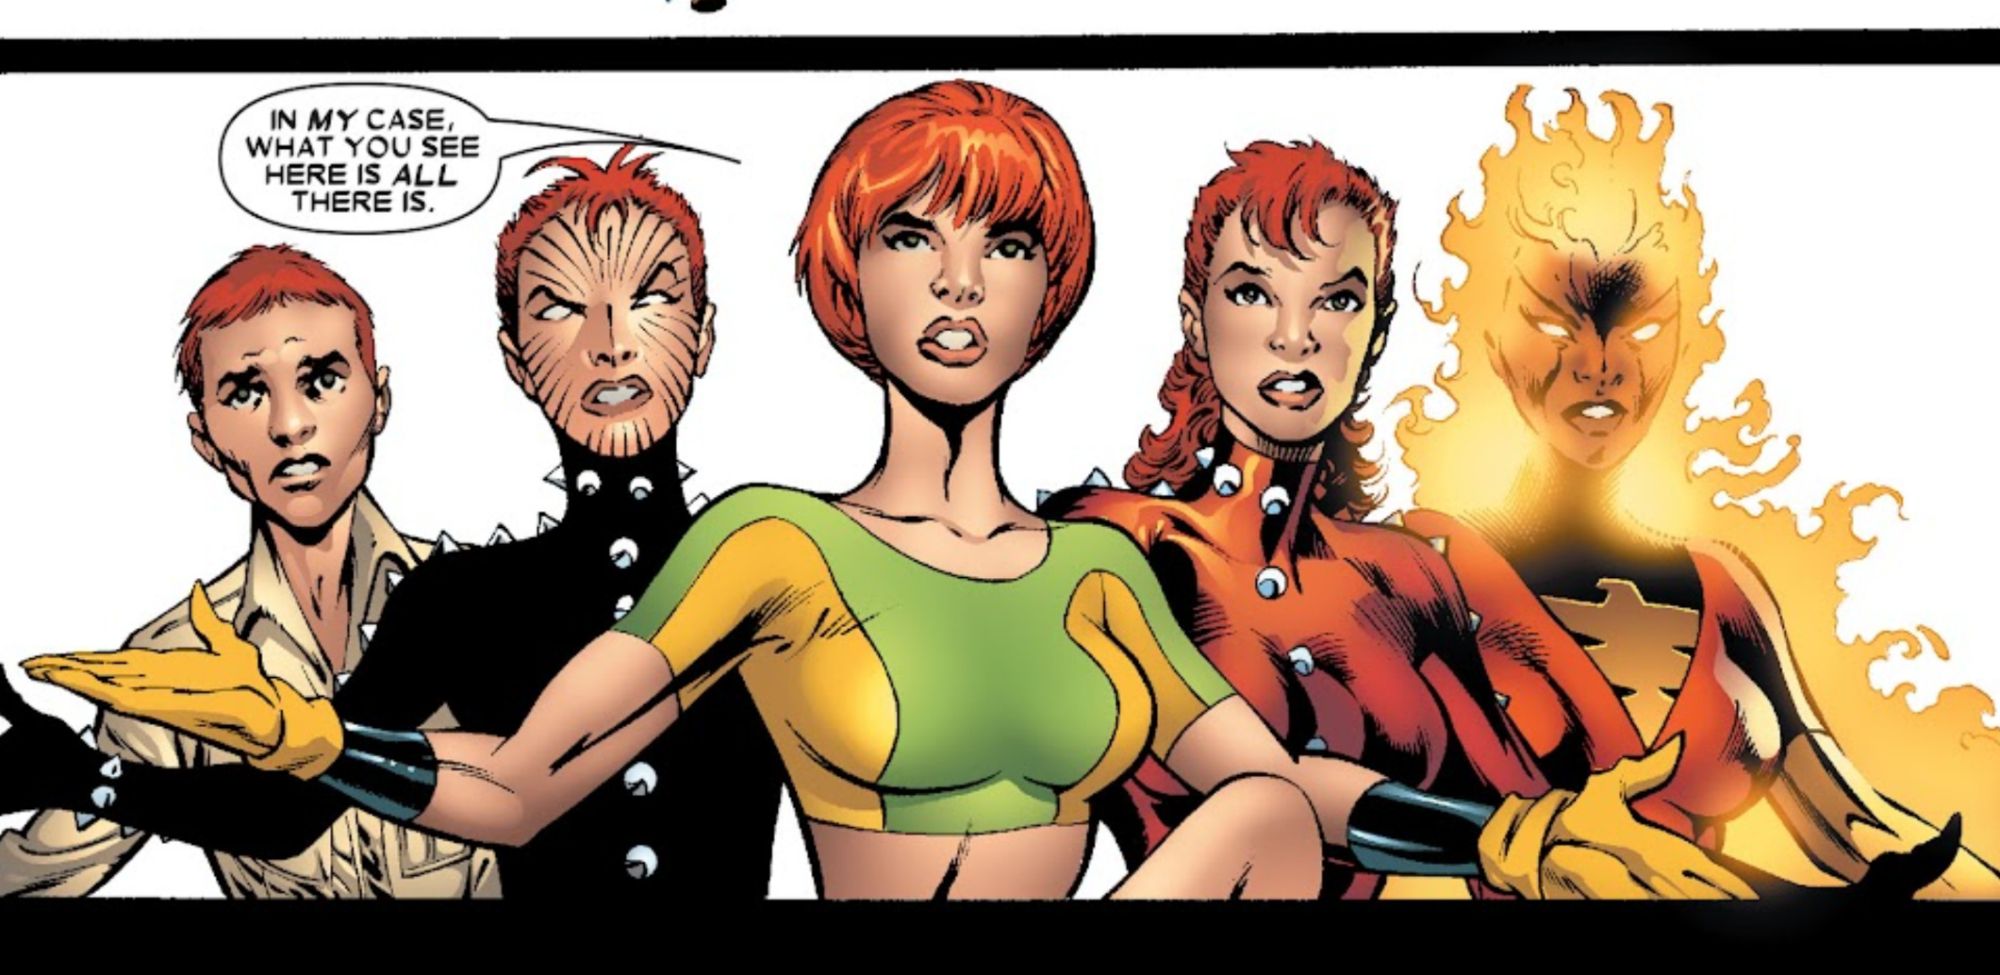 Rachel Summers reveals she's unique in the multiverse in Marvel Comics.